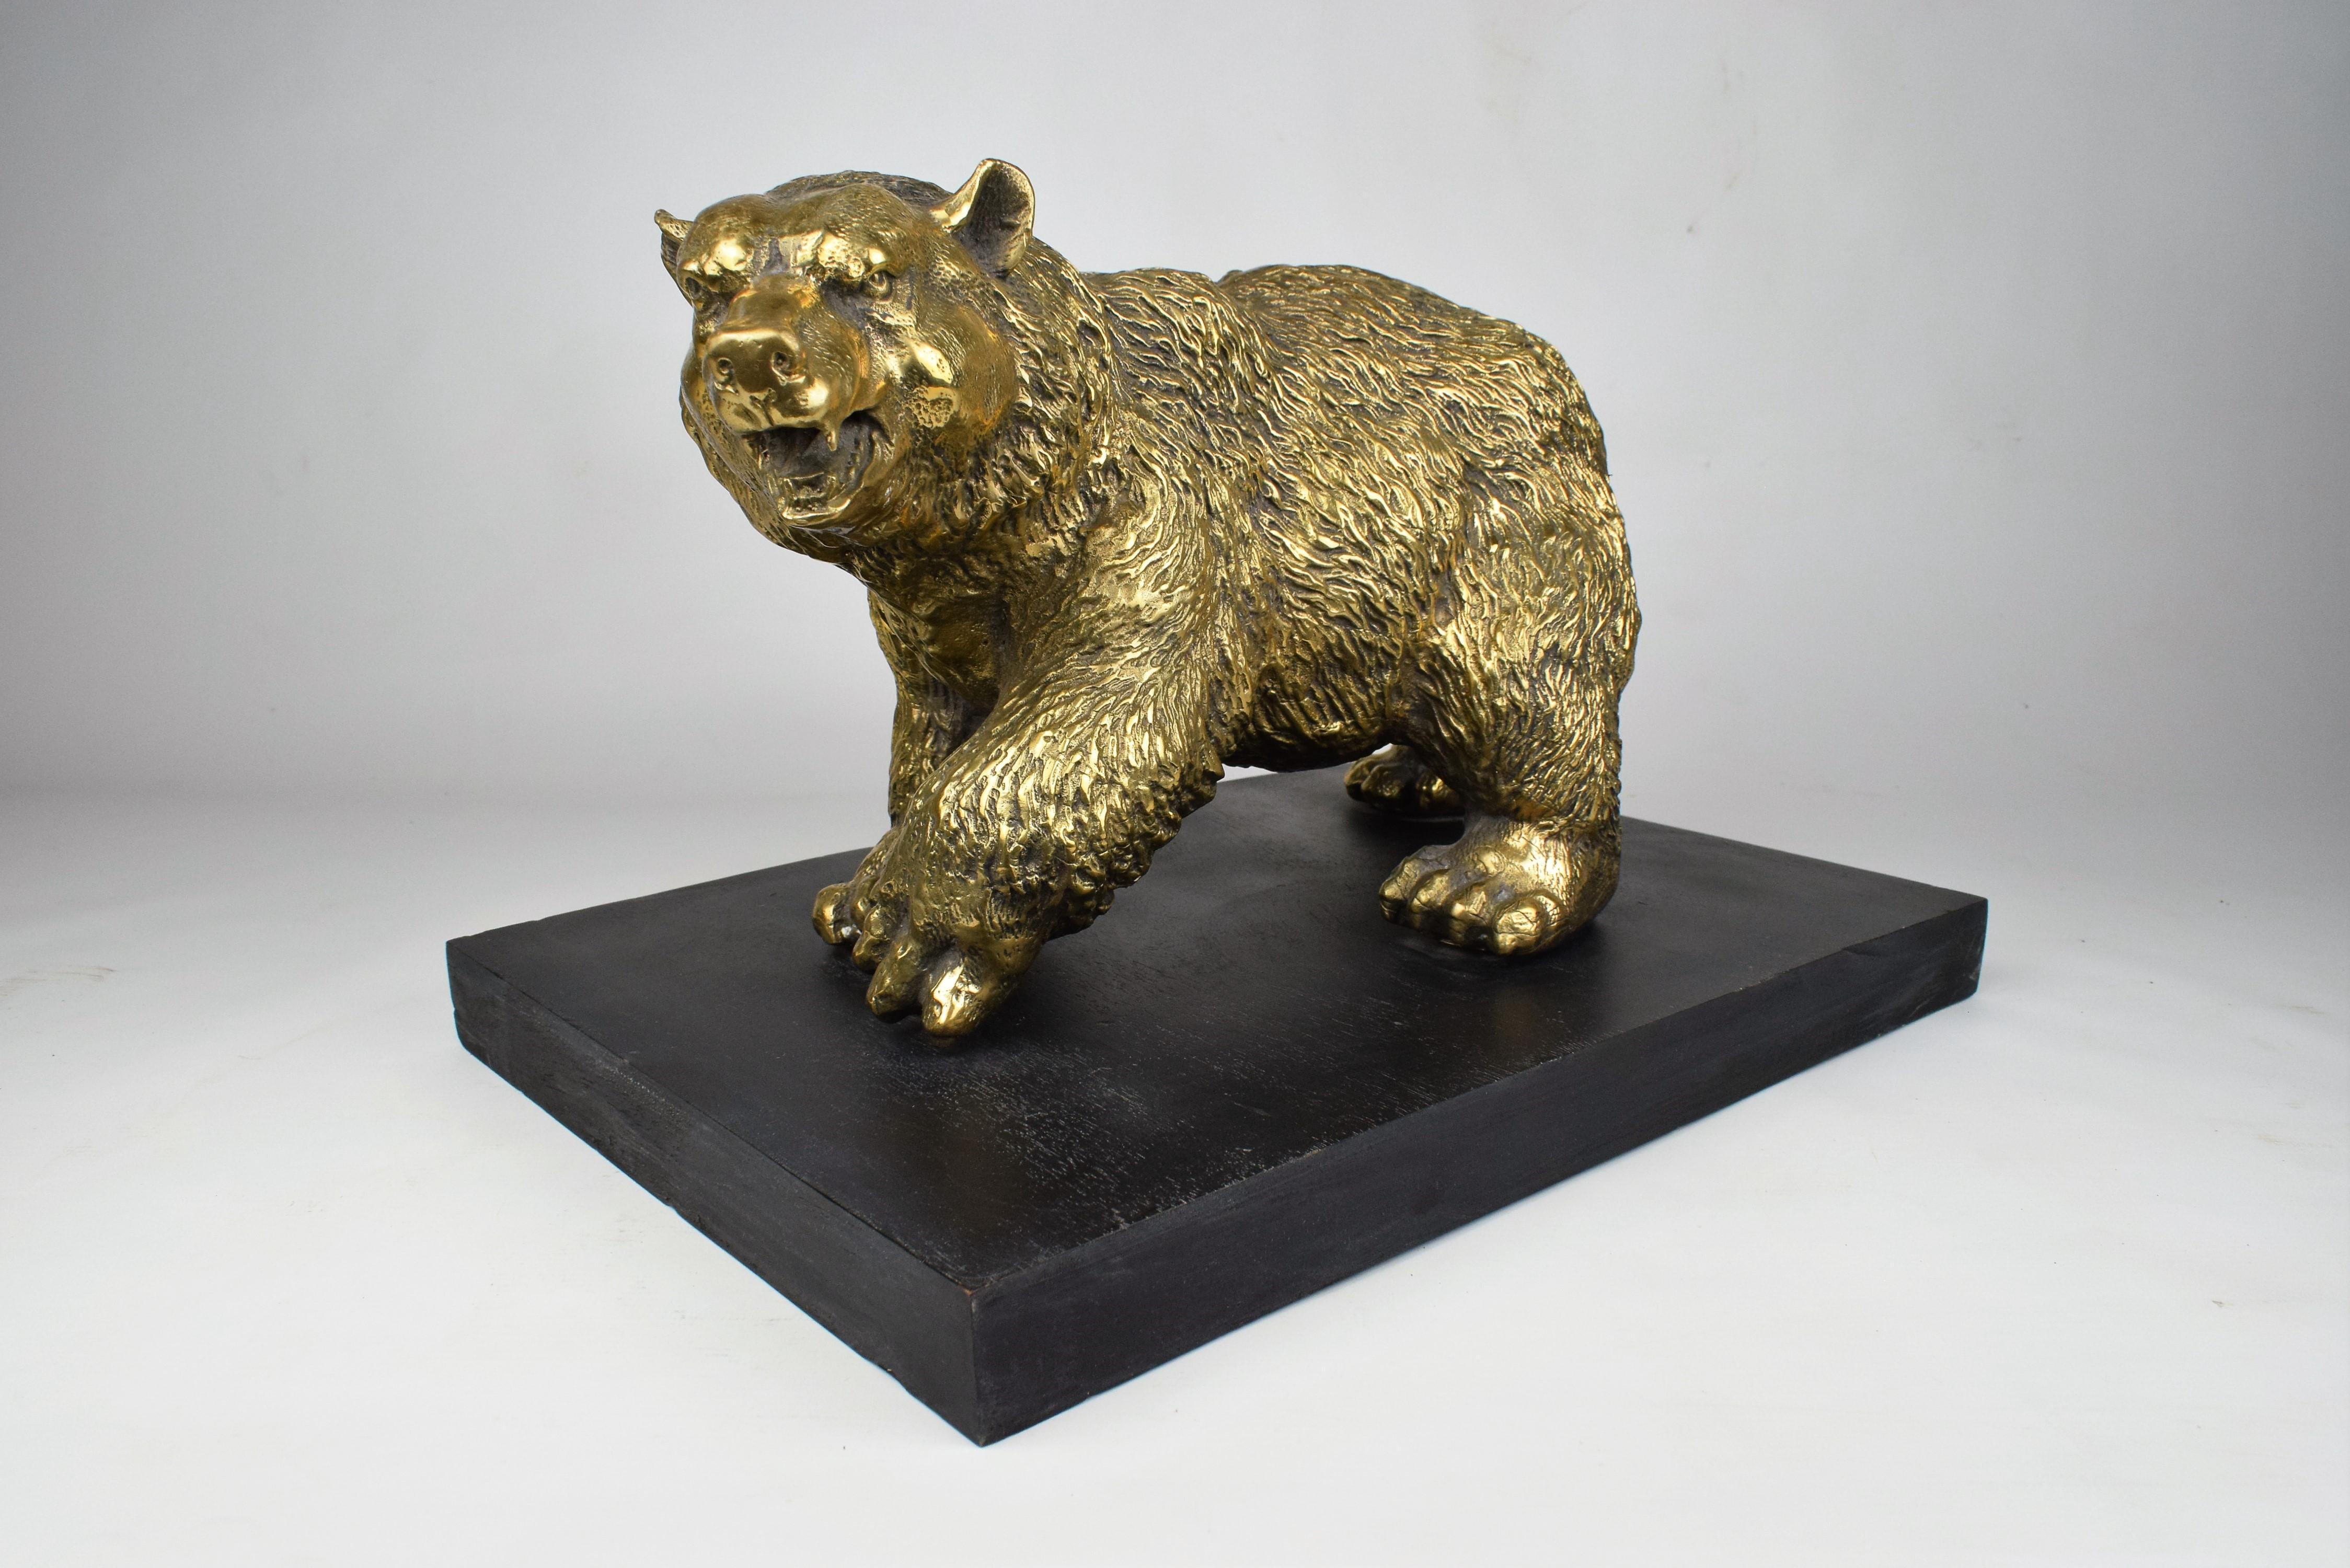 The walking brass bear sculpture is a magnificent and captivating piece of art that showcases the creativity and skill of its creator. Crafted entirely from brass, this sculpture exudes a timeless charm and elegance. Its life-like representation of